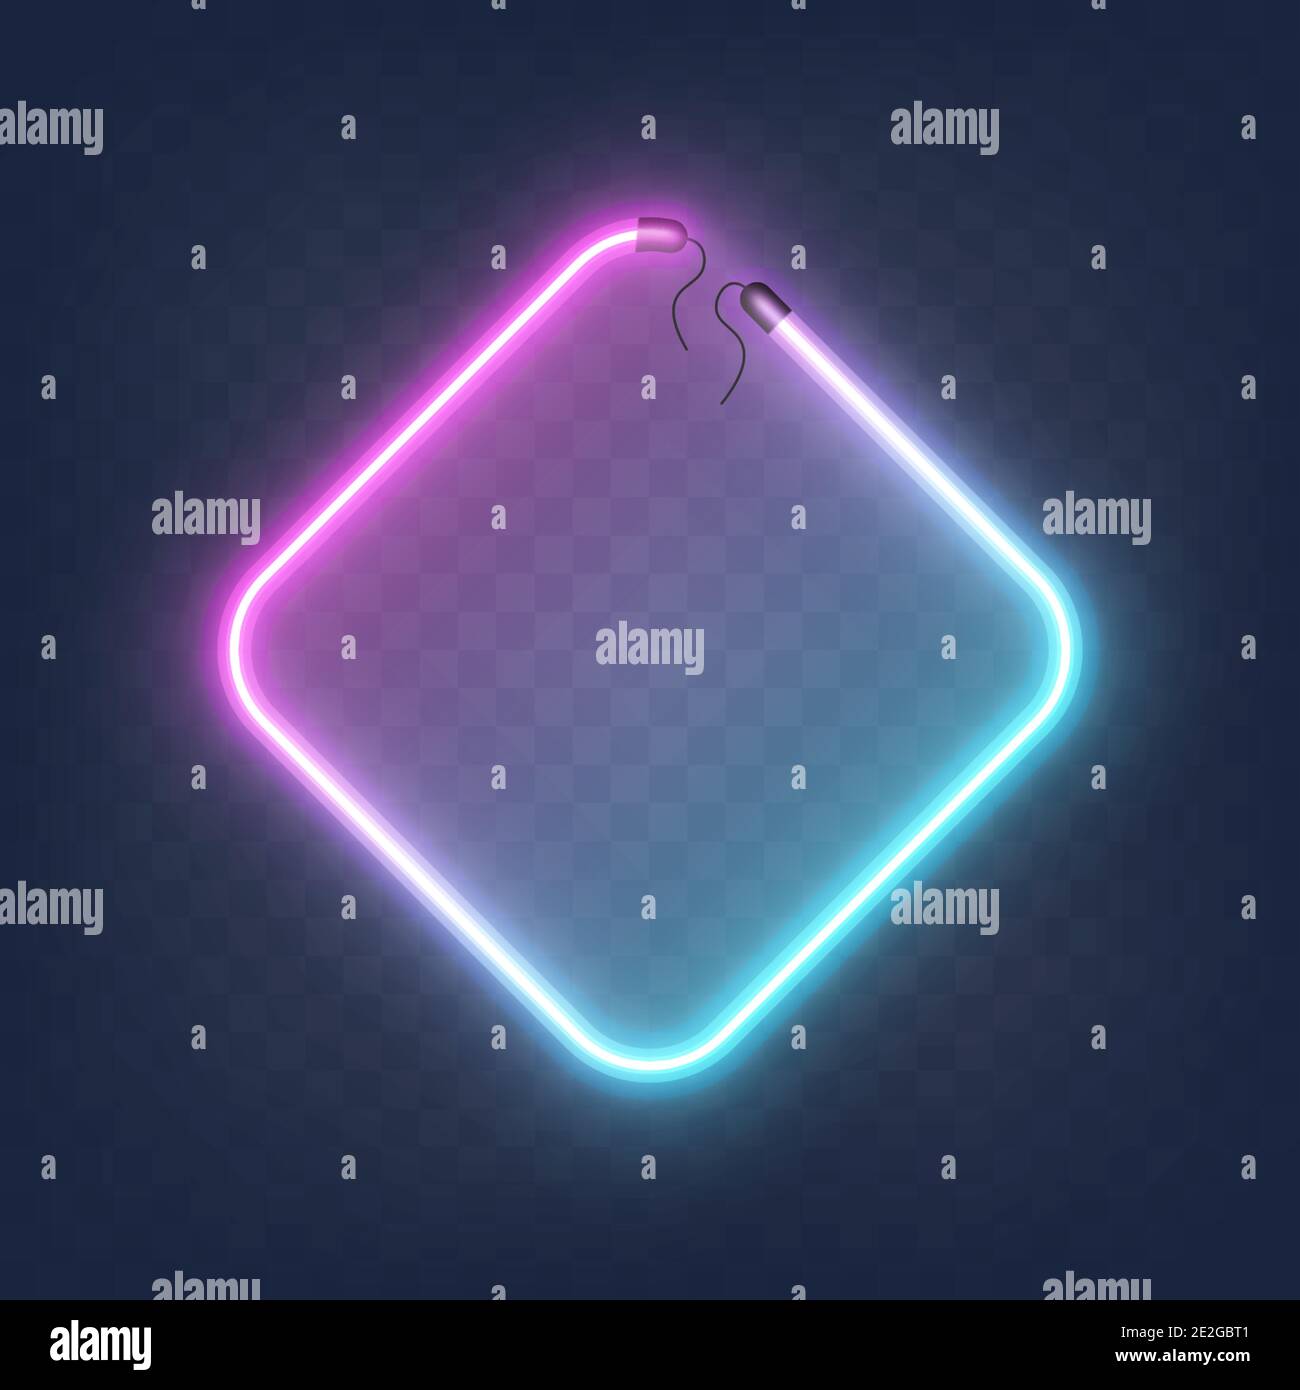 Realistic glowing shape neon rhombus frame isolated on transparent background with place for text. Shining and glowing neon effect with wires, Vector Stock Vector